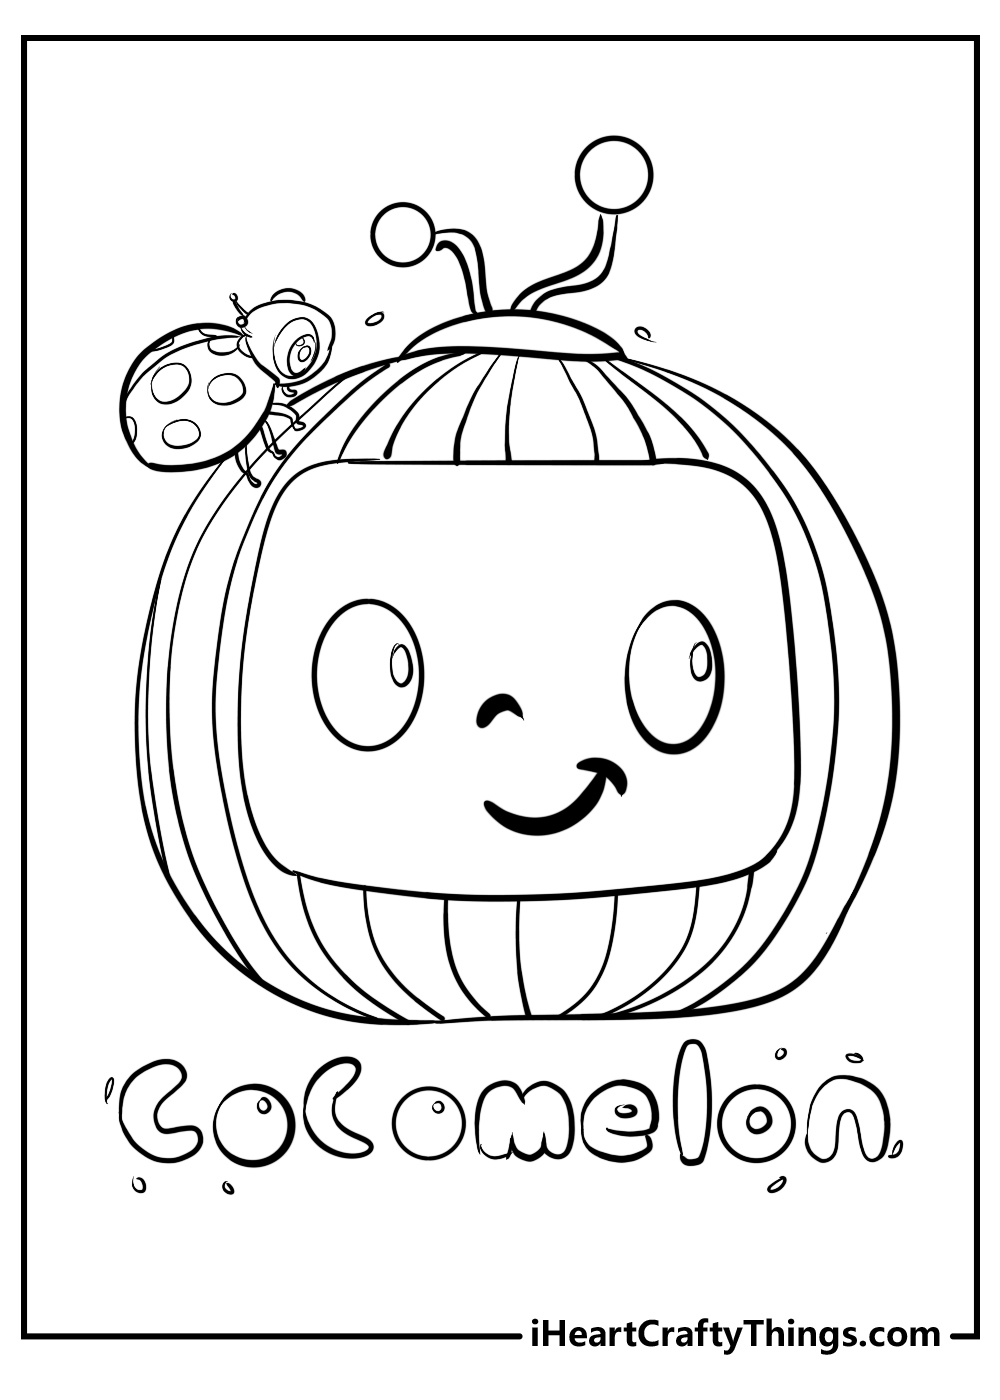 CoComelon Coloring Pages 